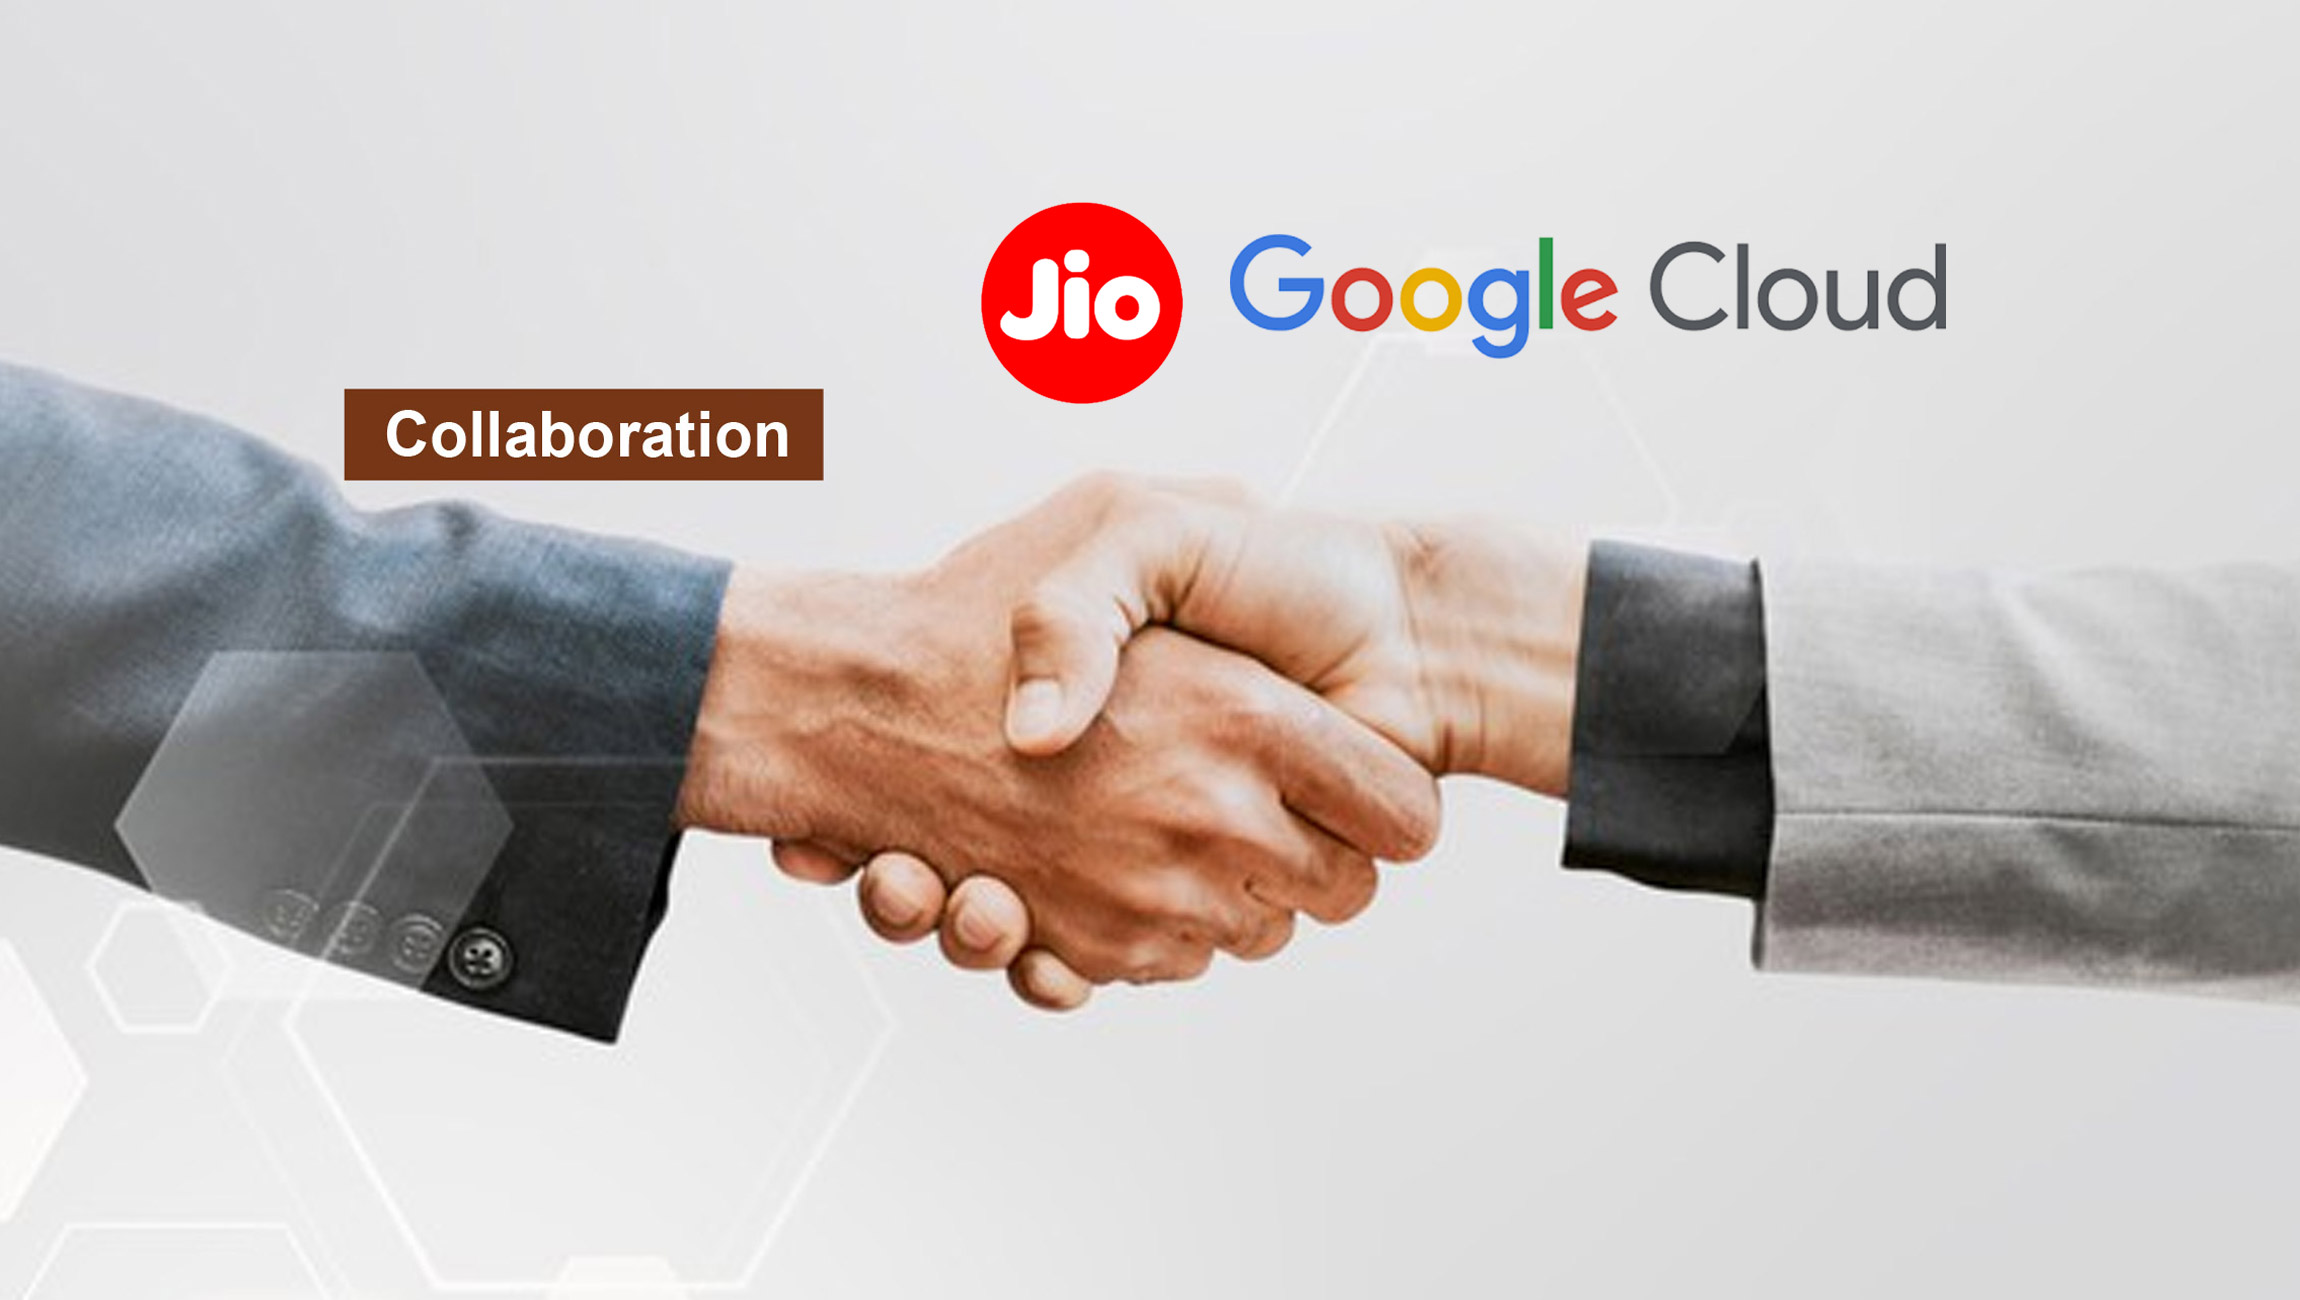 Jio-and-Google-Cloud-to-Collaborate-on-5G-Technology-to-Enable-a-Billion-Indians-Access-Superior-Connectivity